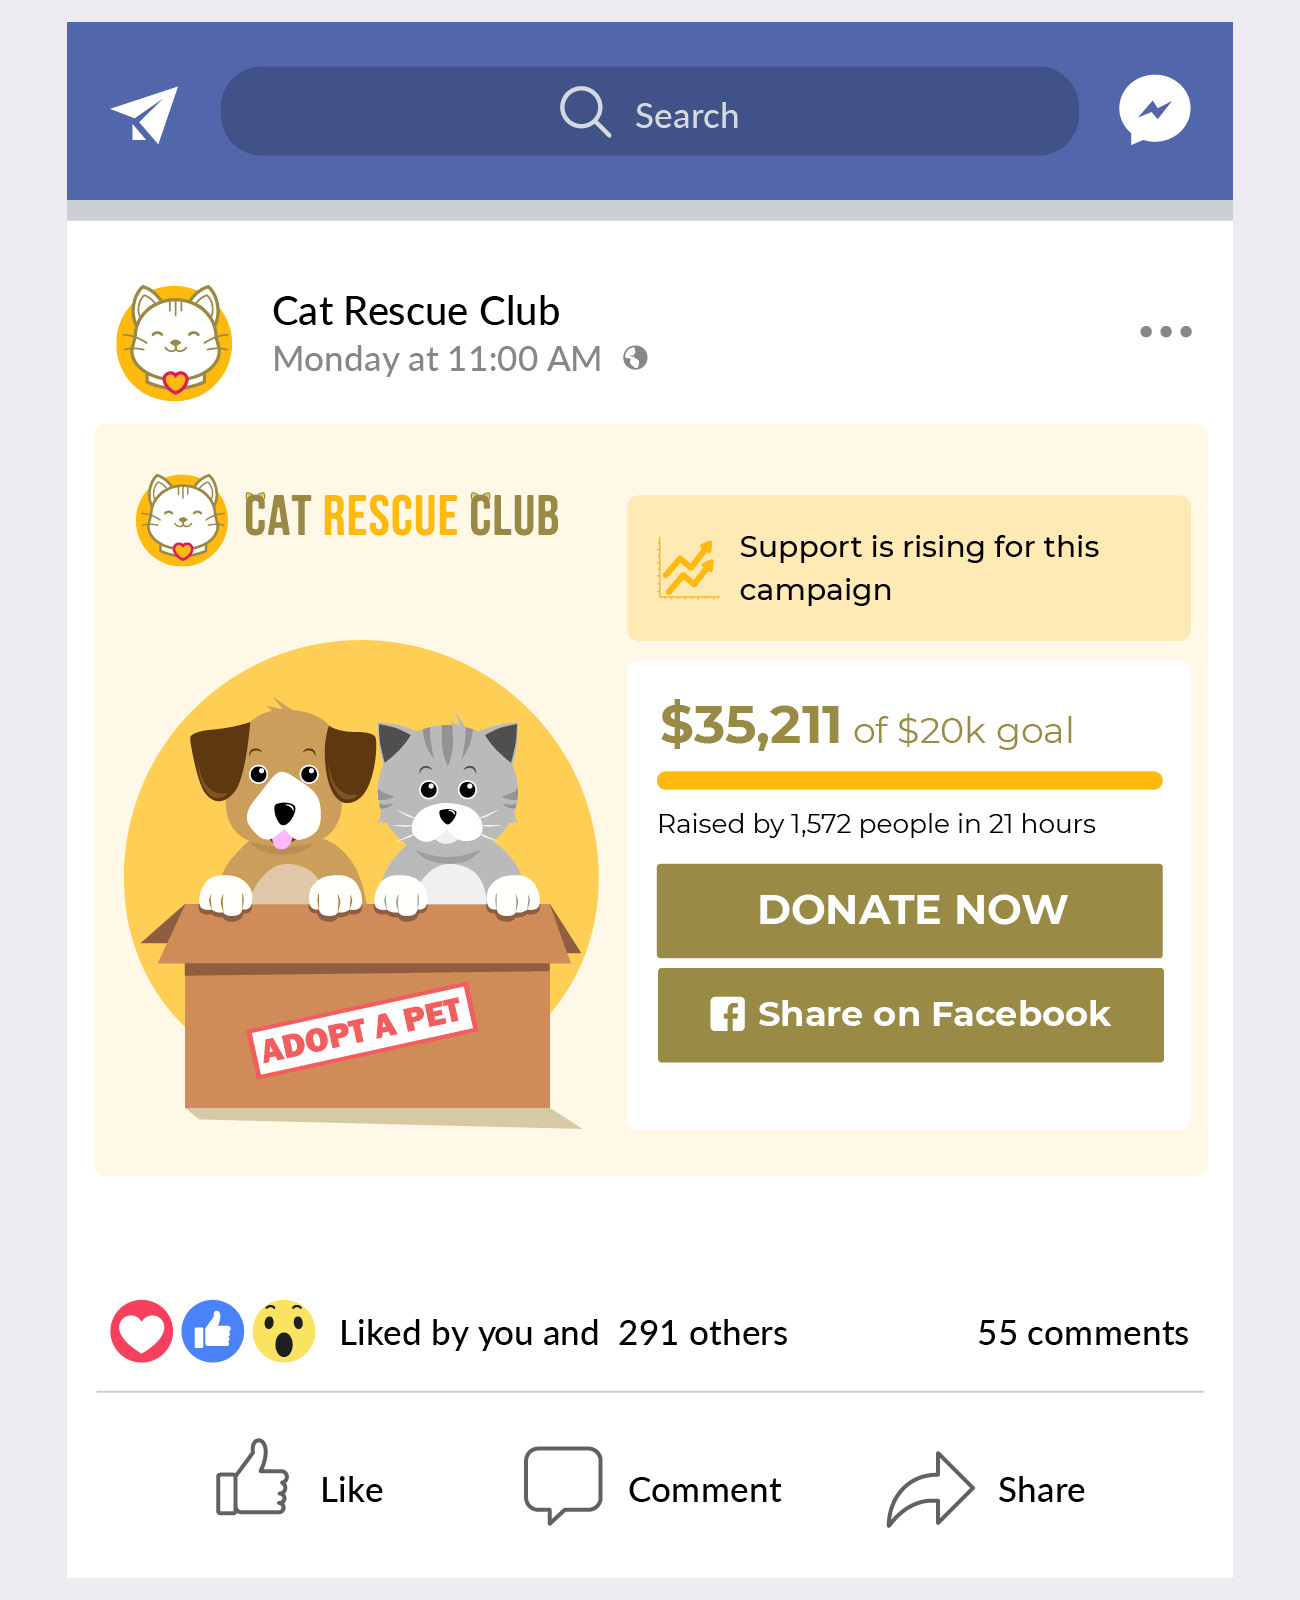 Promoting a nonprofit crowdfunding page on social media